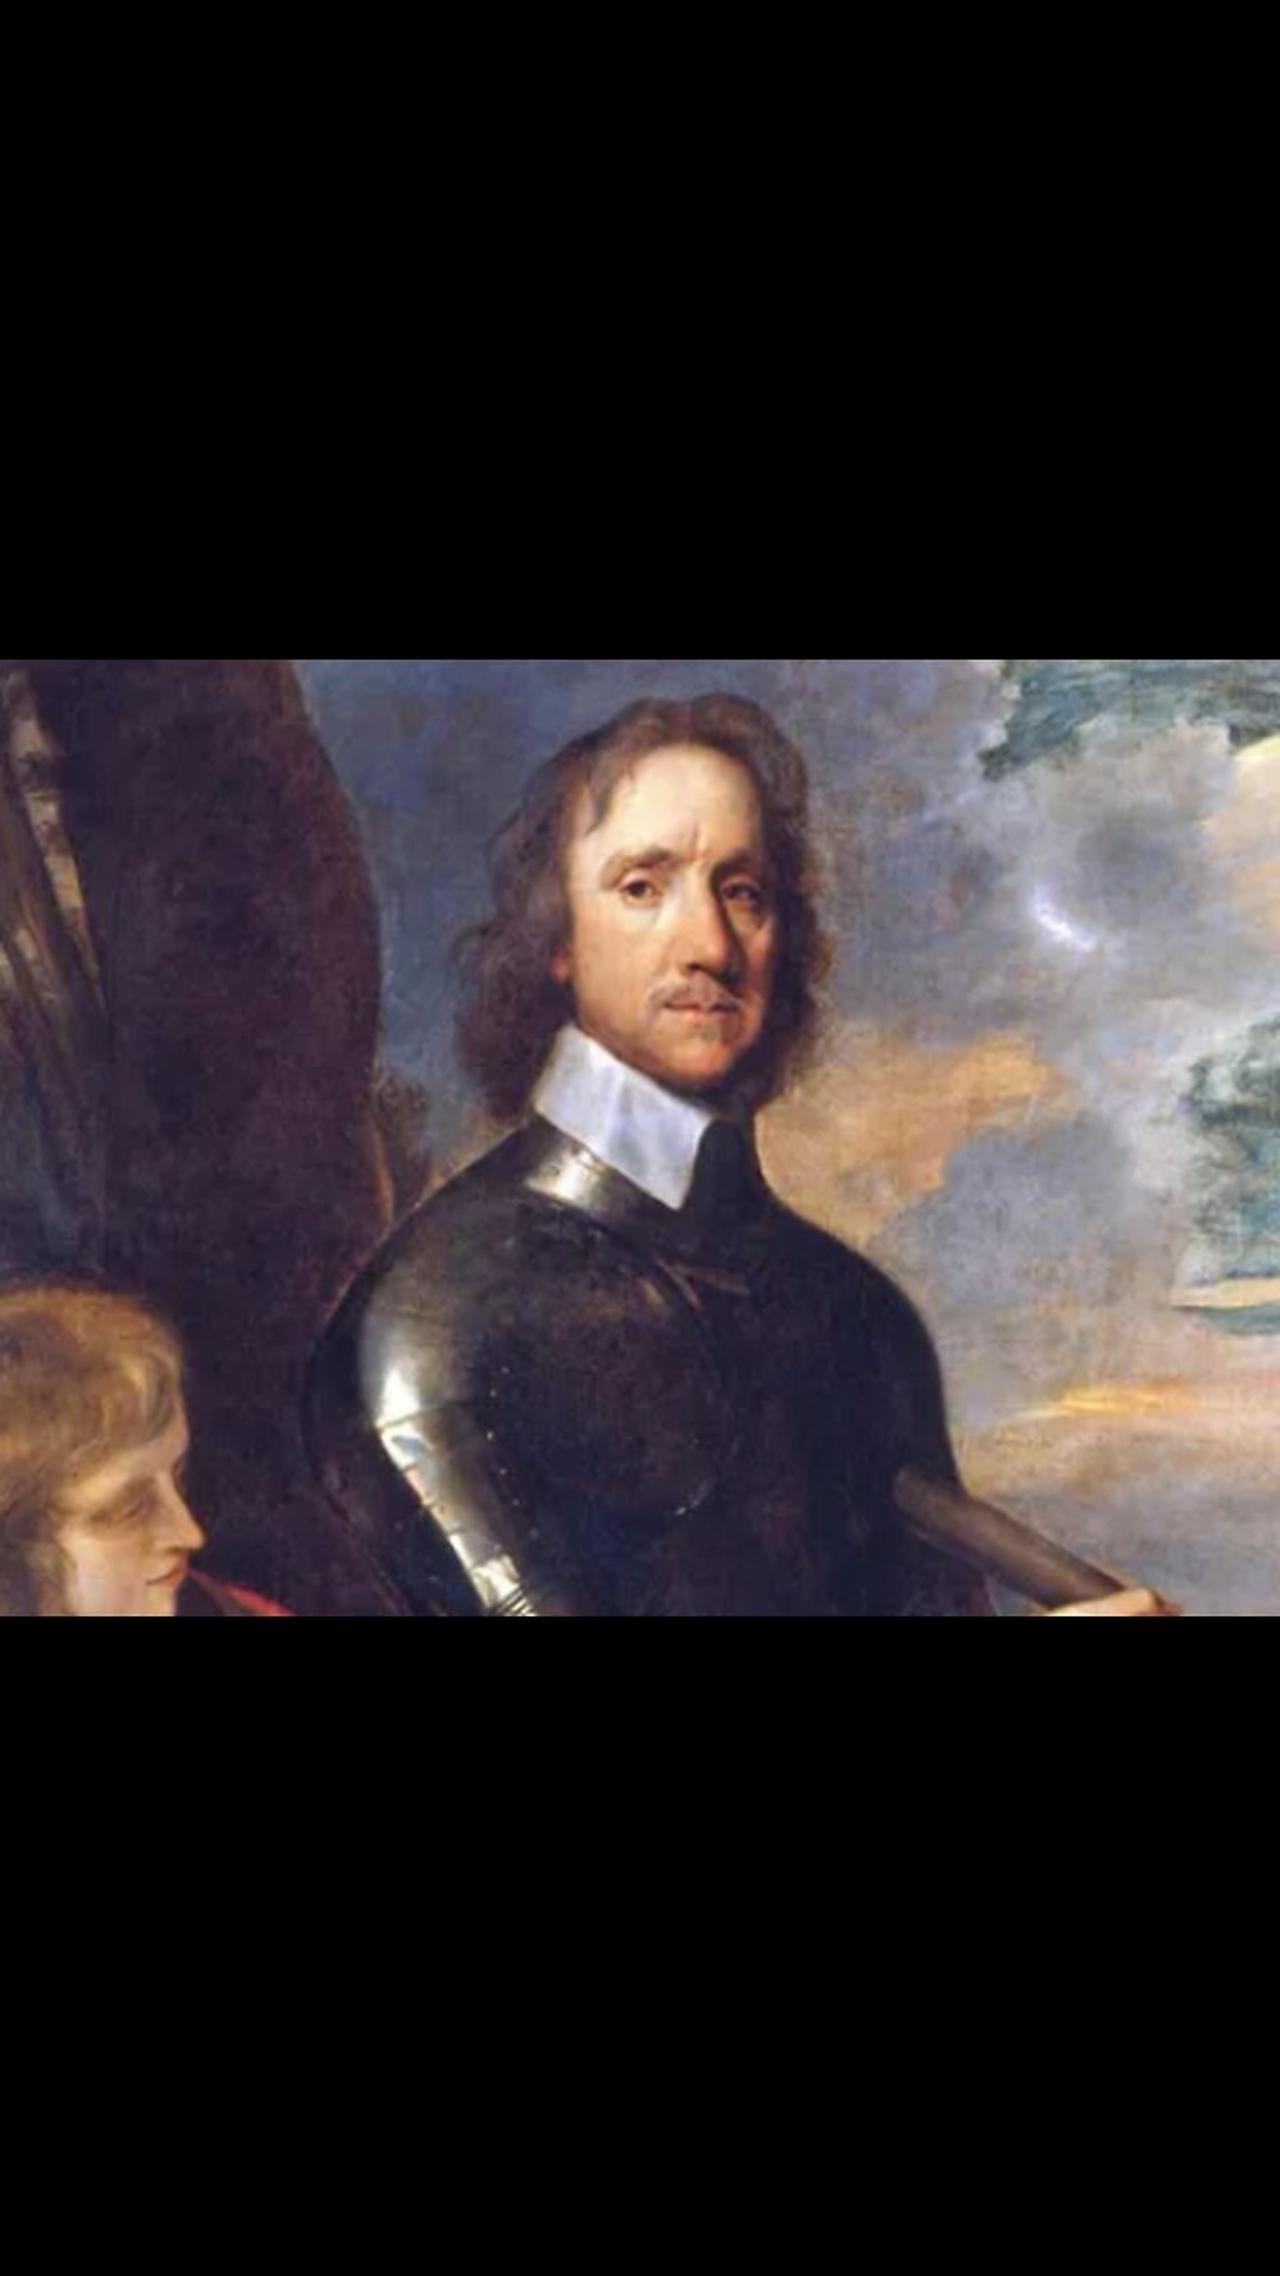 Who Was Oliver Cromwell?